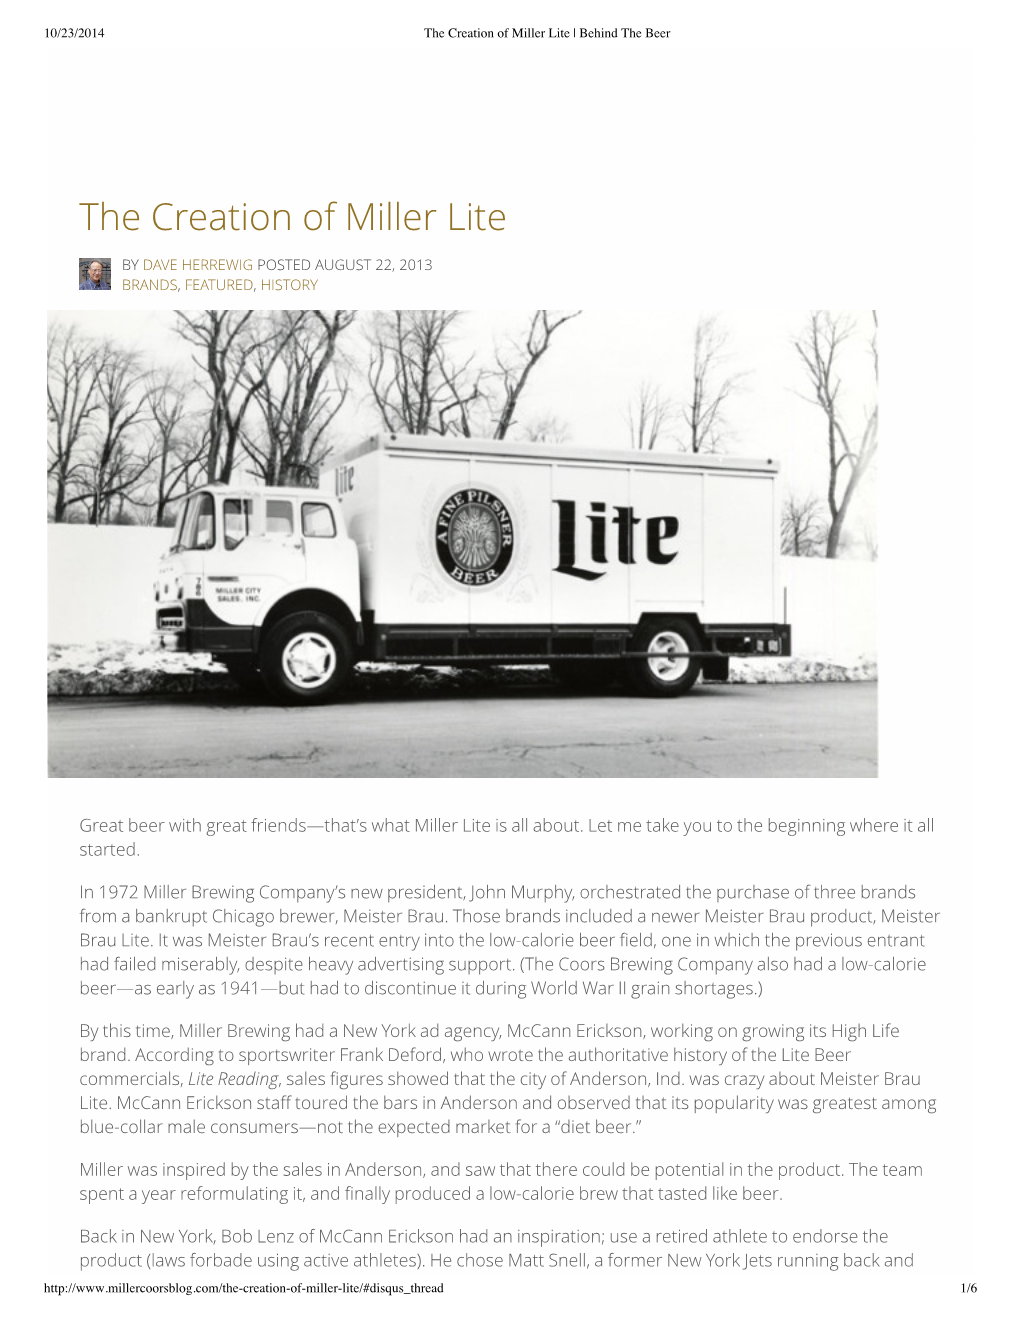 The Creation of Miller Lite | Behind the Beer